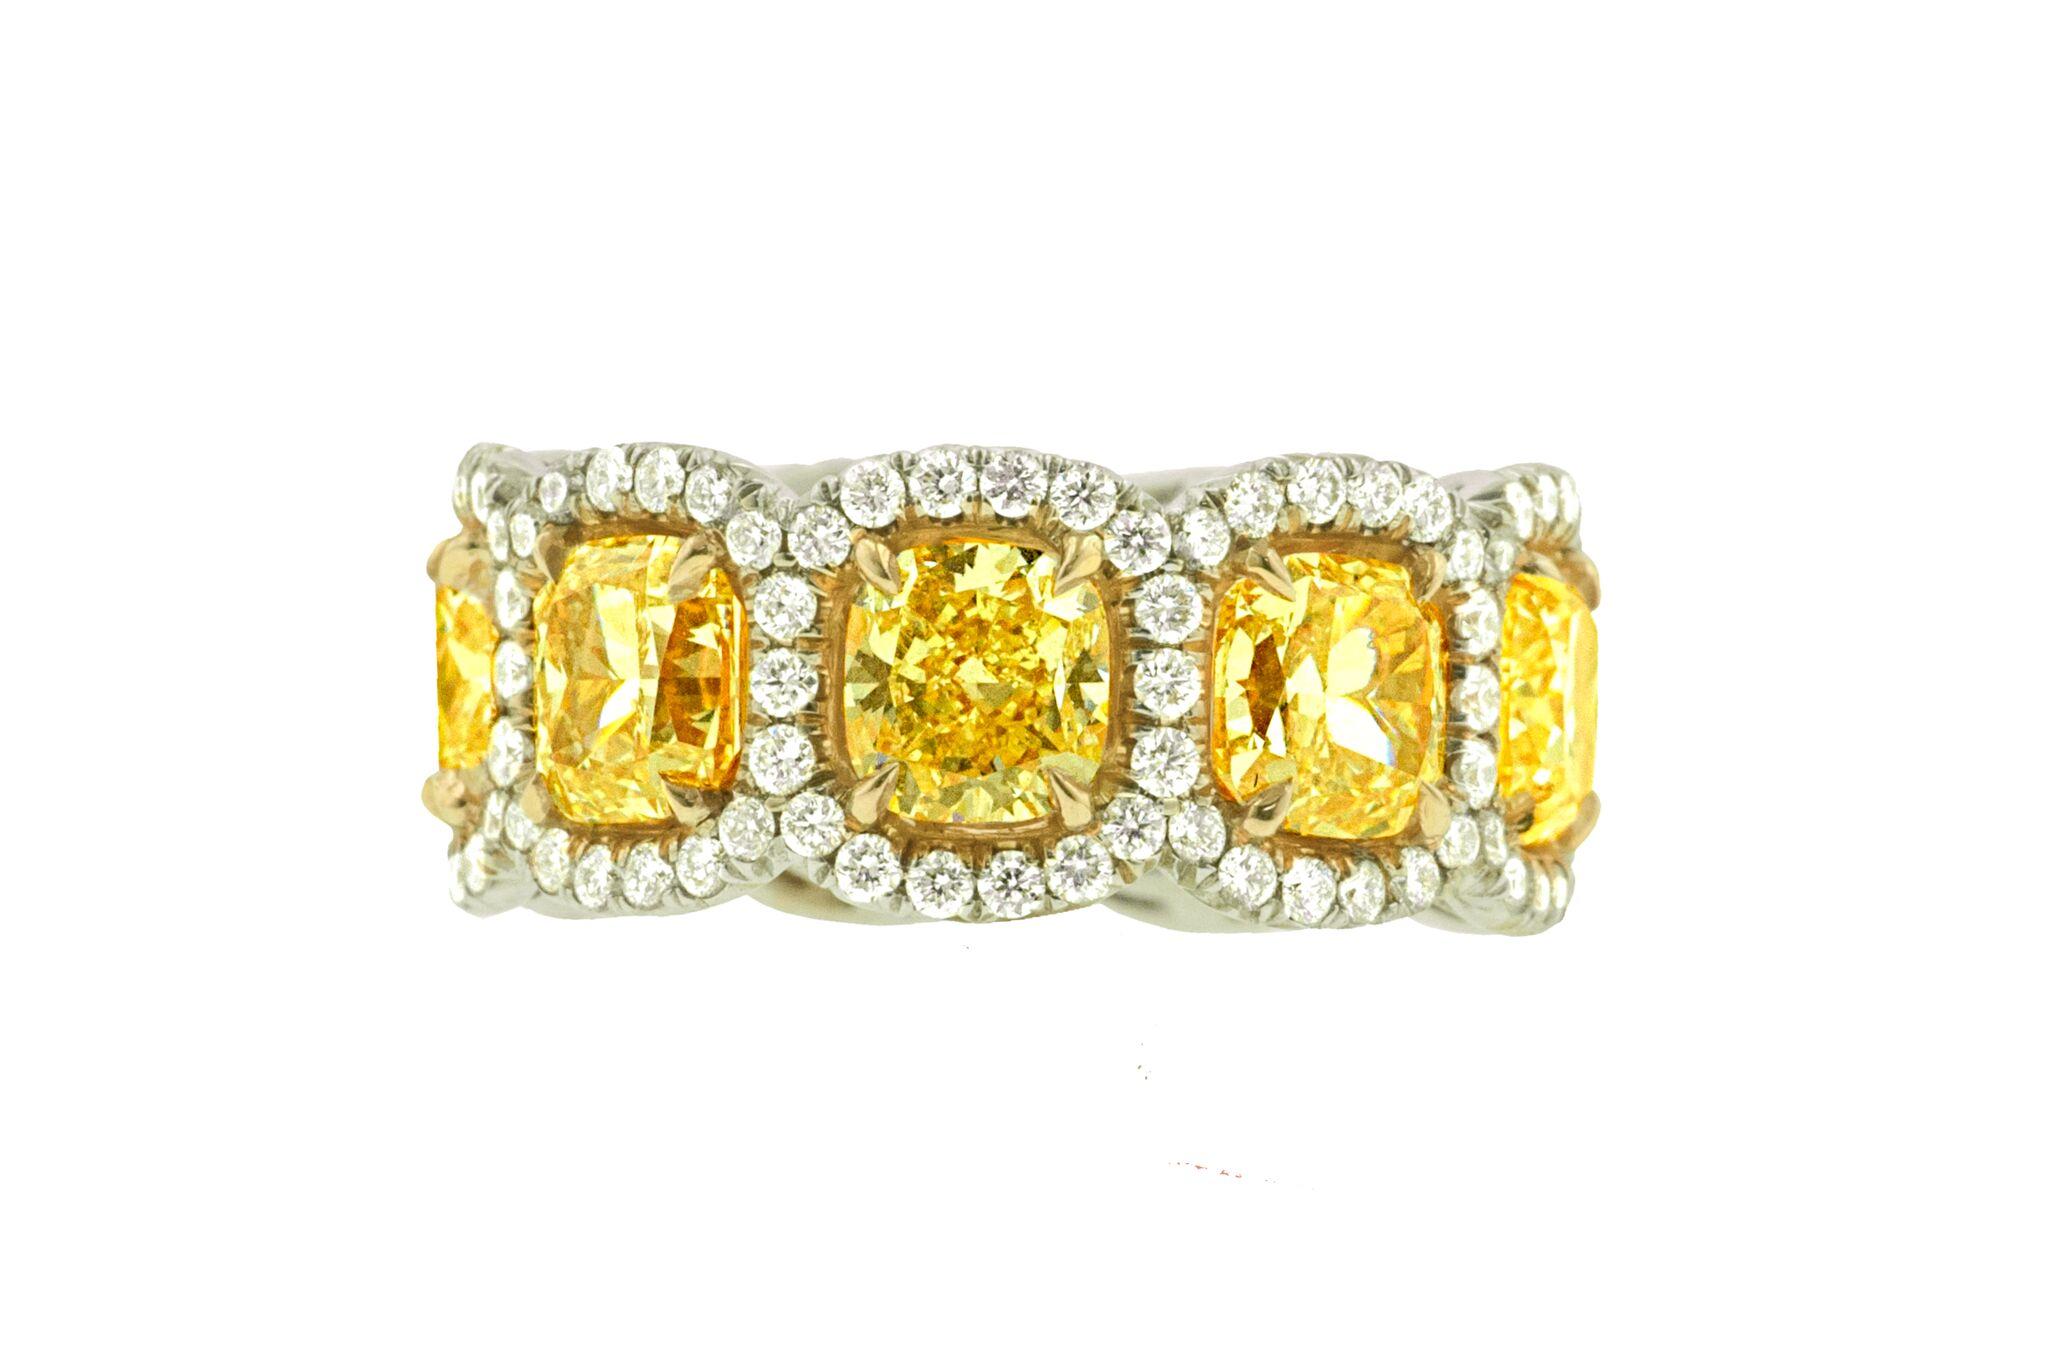 18kt white and yellow gold custom eternight band featuring 11.22 carats of fancy yellow cushion cut diamonds alongside 2.00 carats of round diamonds in a halo design 
